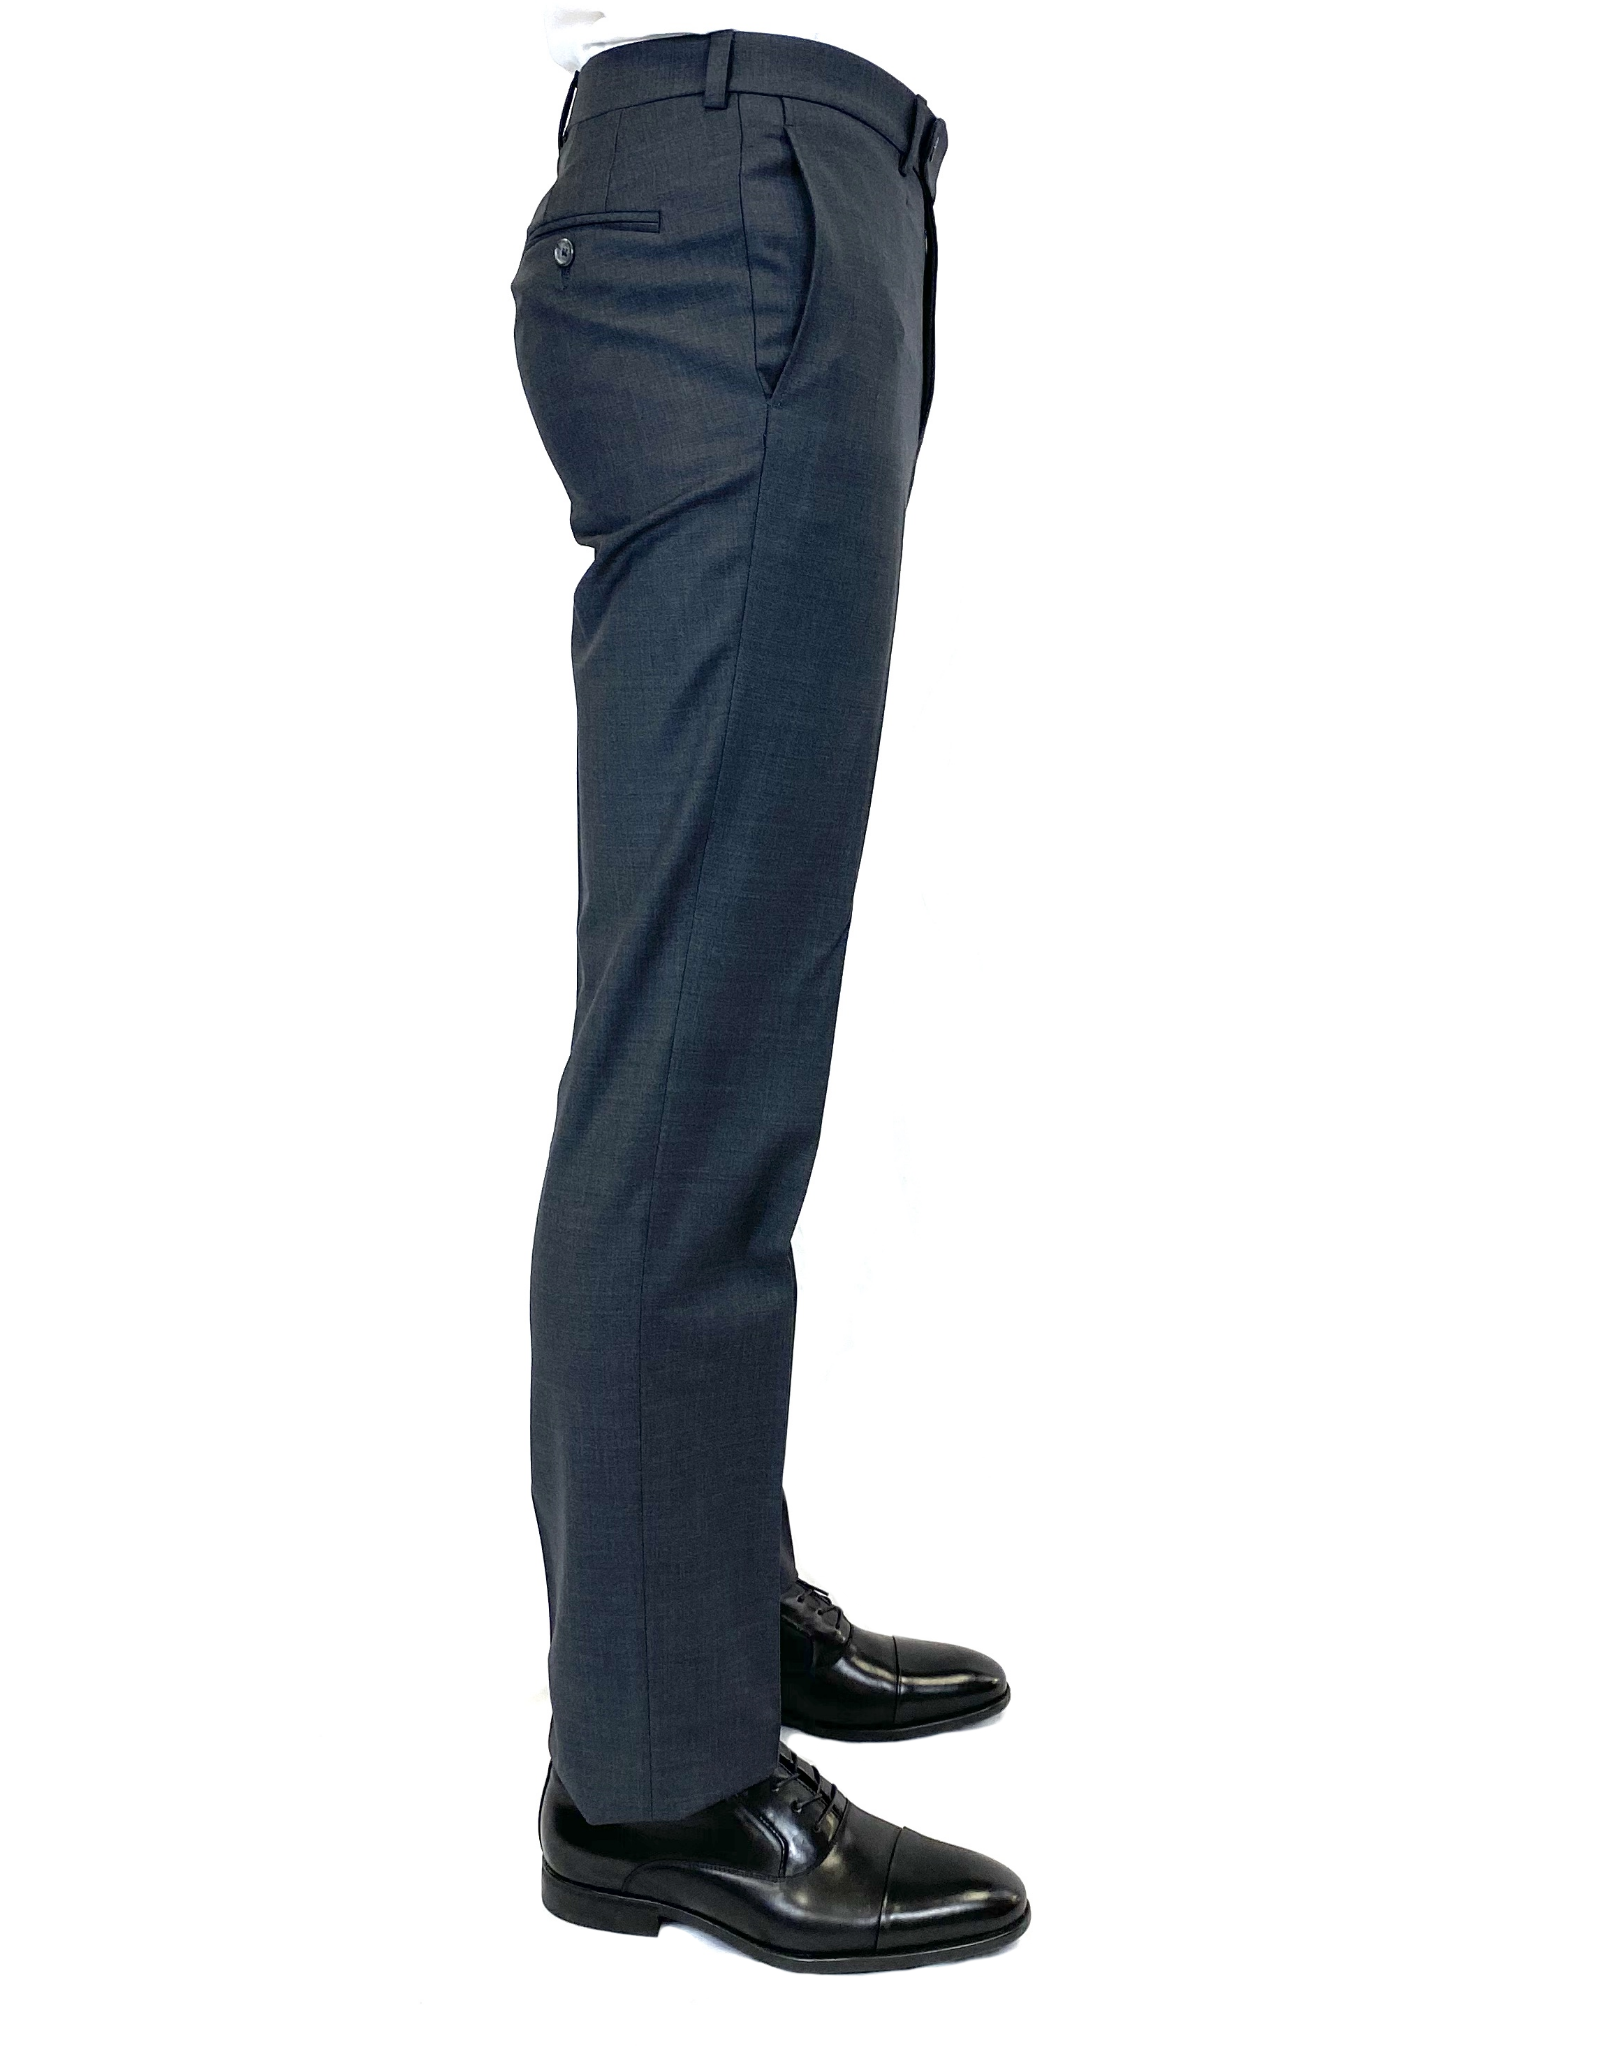 Riviera Classic Fit Traveler Dress Pant in Charcoal